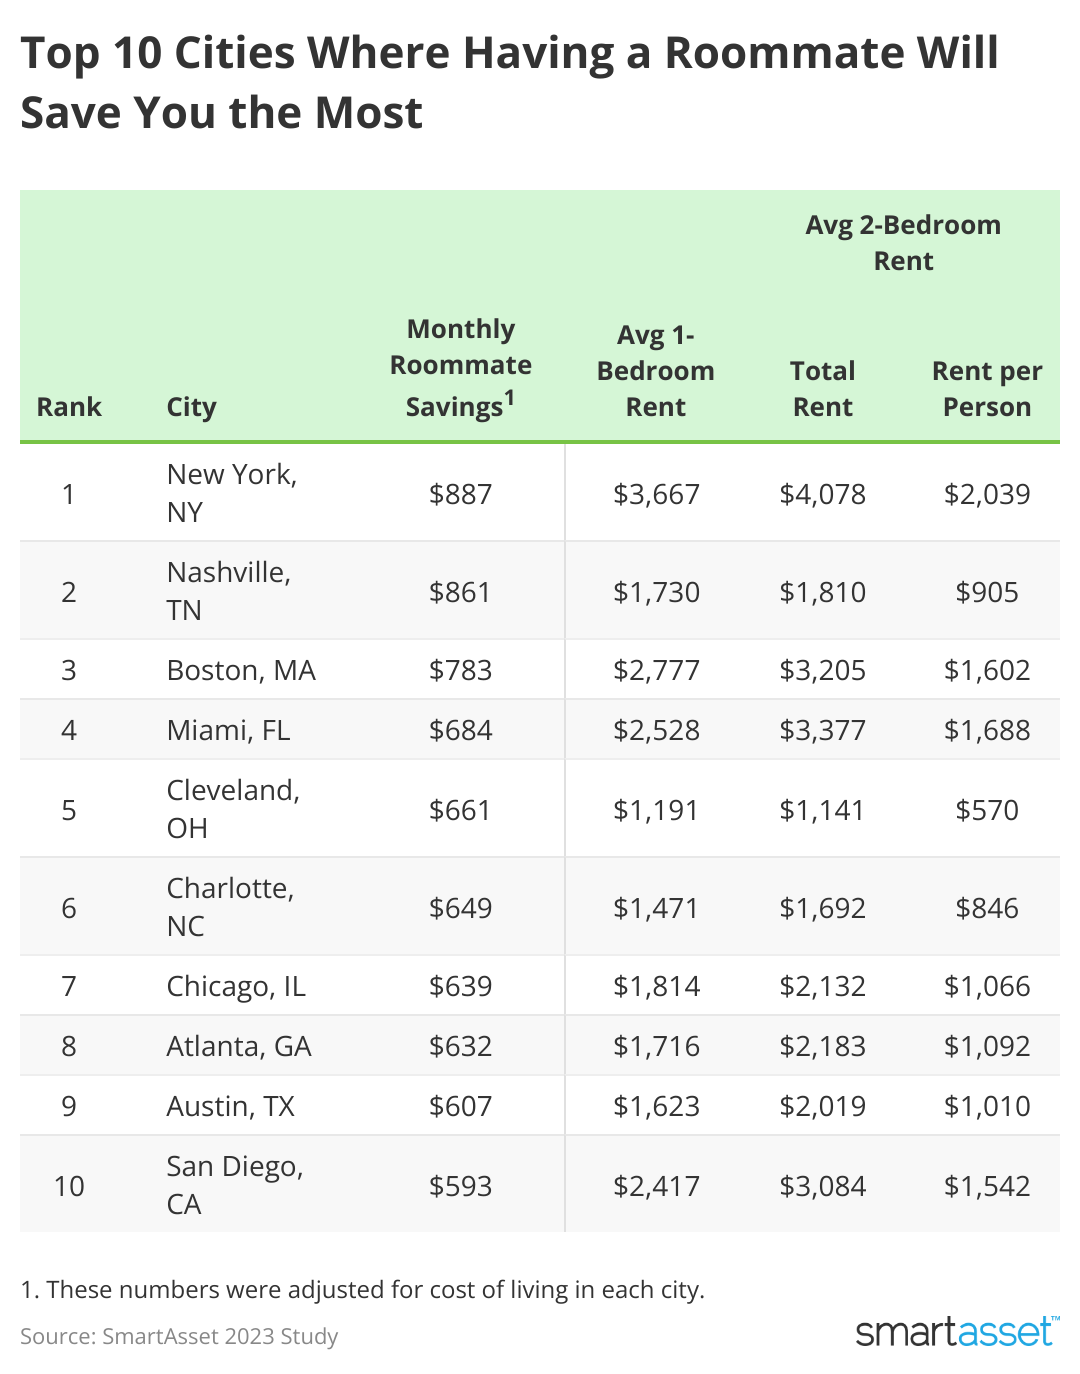 Chart showing top 10 cities where having a roommate will save you the most.